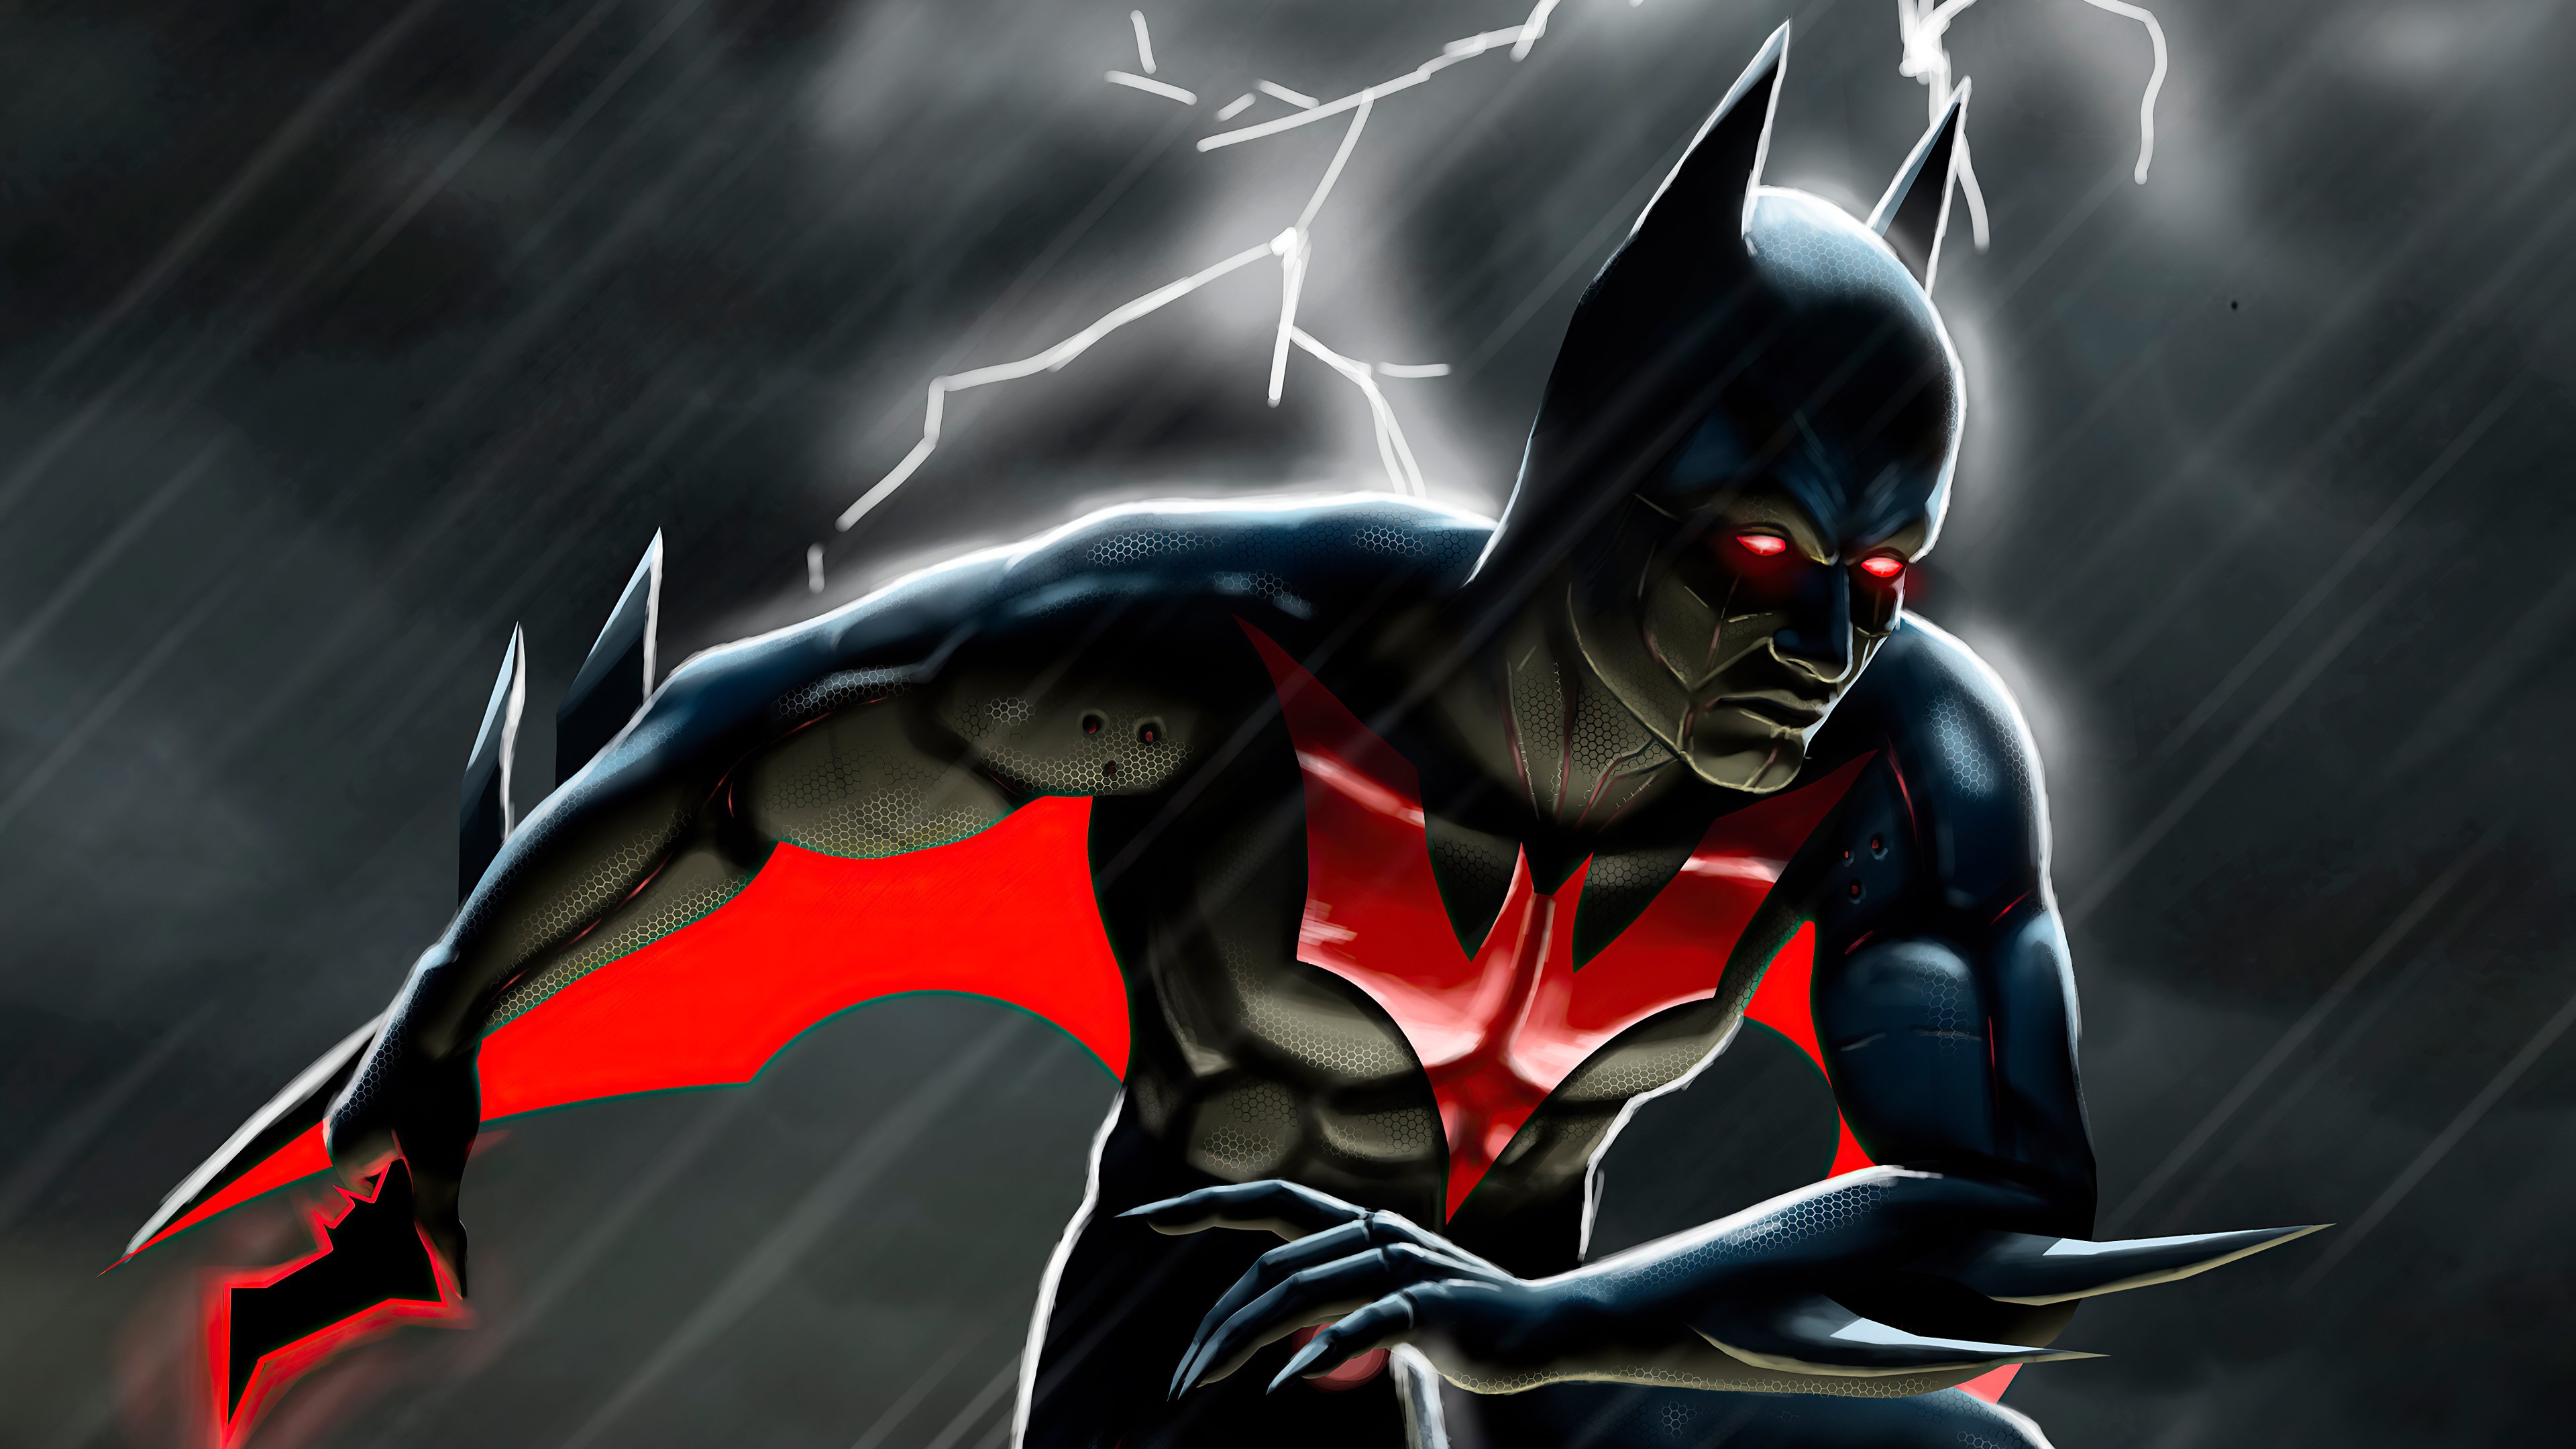 Wallpaper Batman with black and red suit